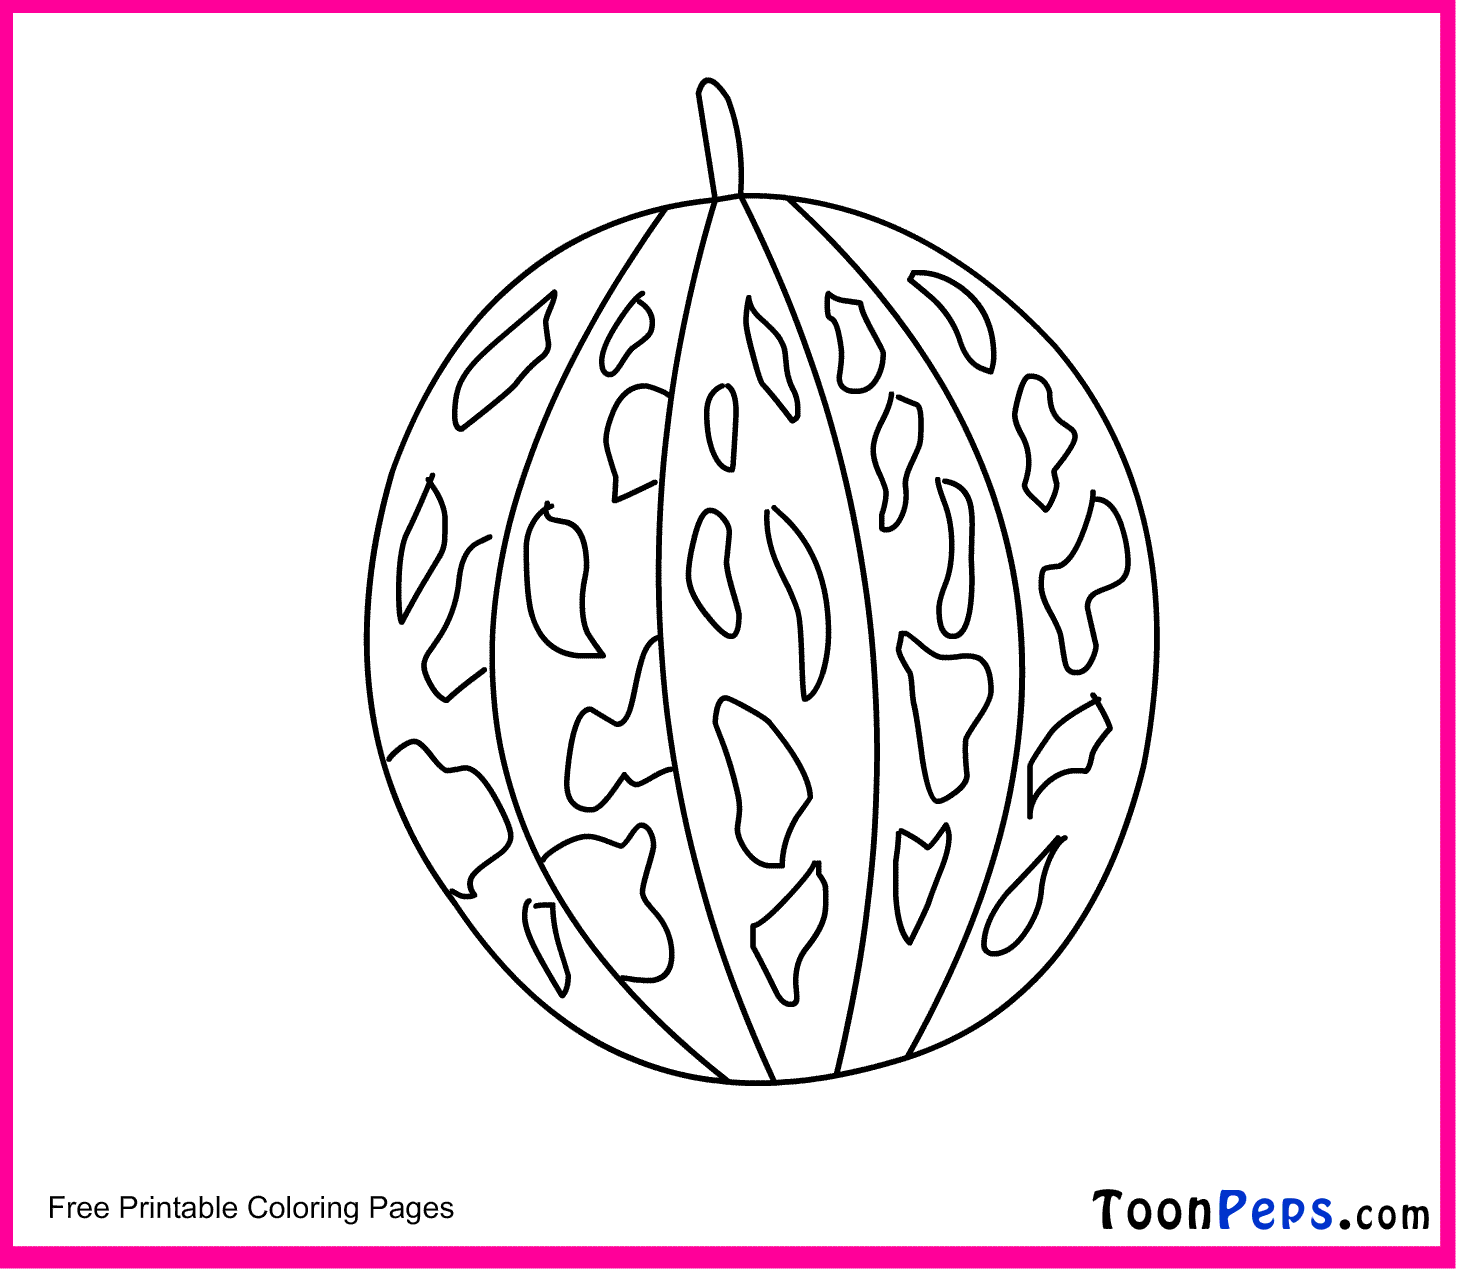 Toonpeps : Free Printable Musk Melon coloring pages for kids